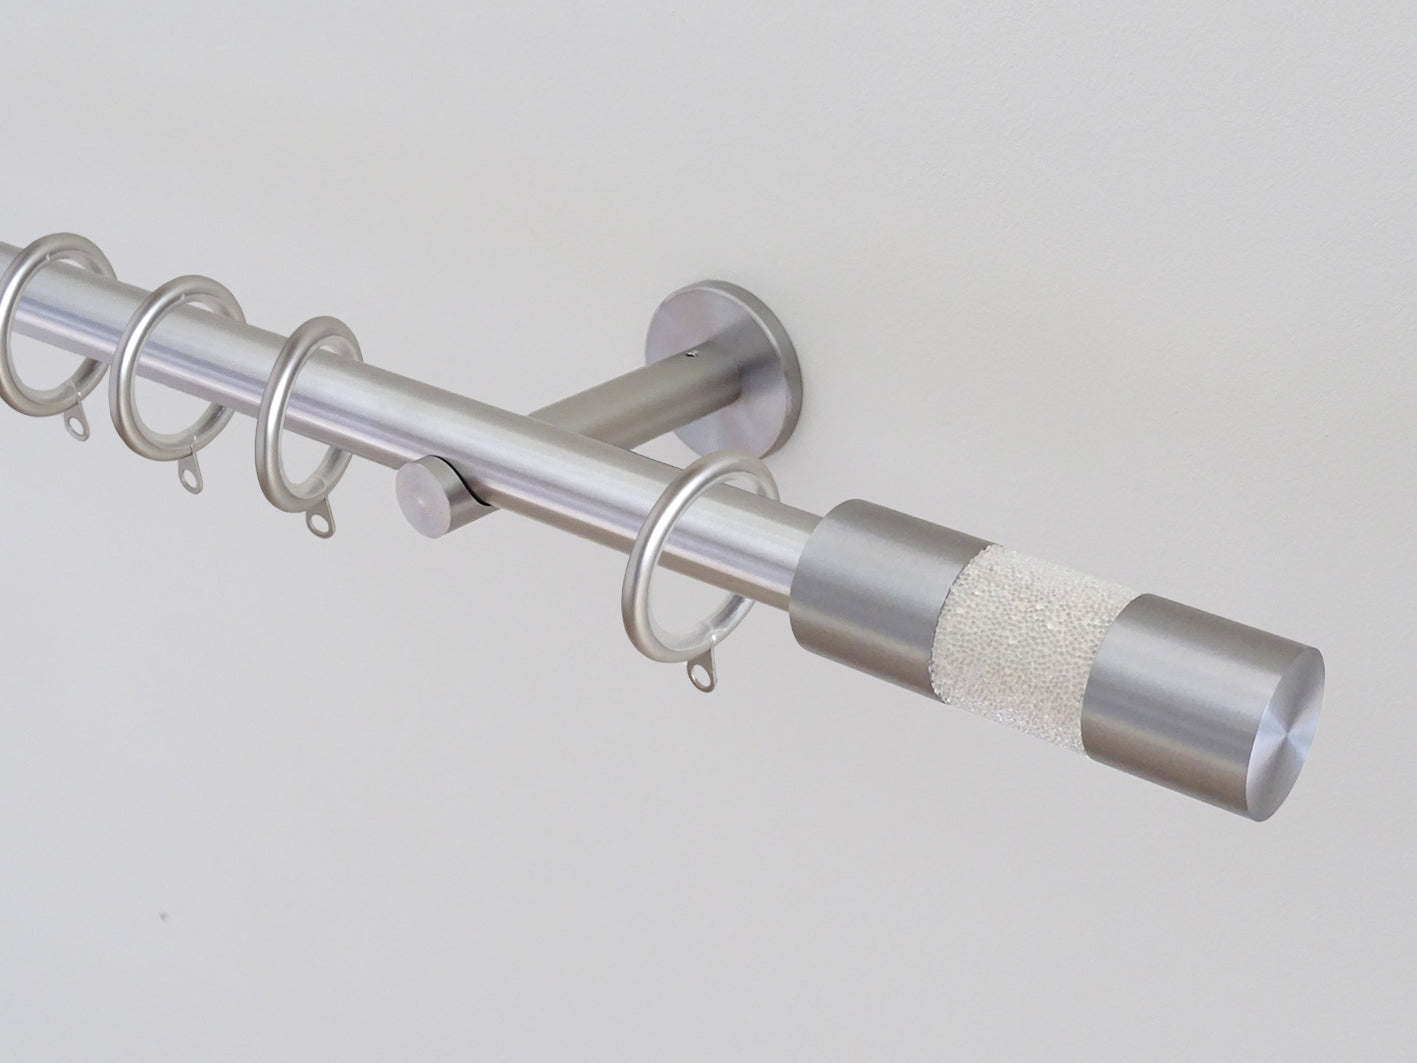 19mm diameter stainless steel curtain pole sets with steel barrel finials in champagne cream